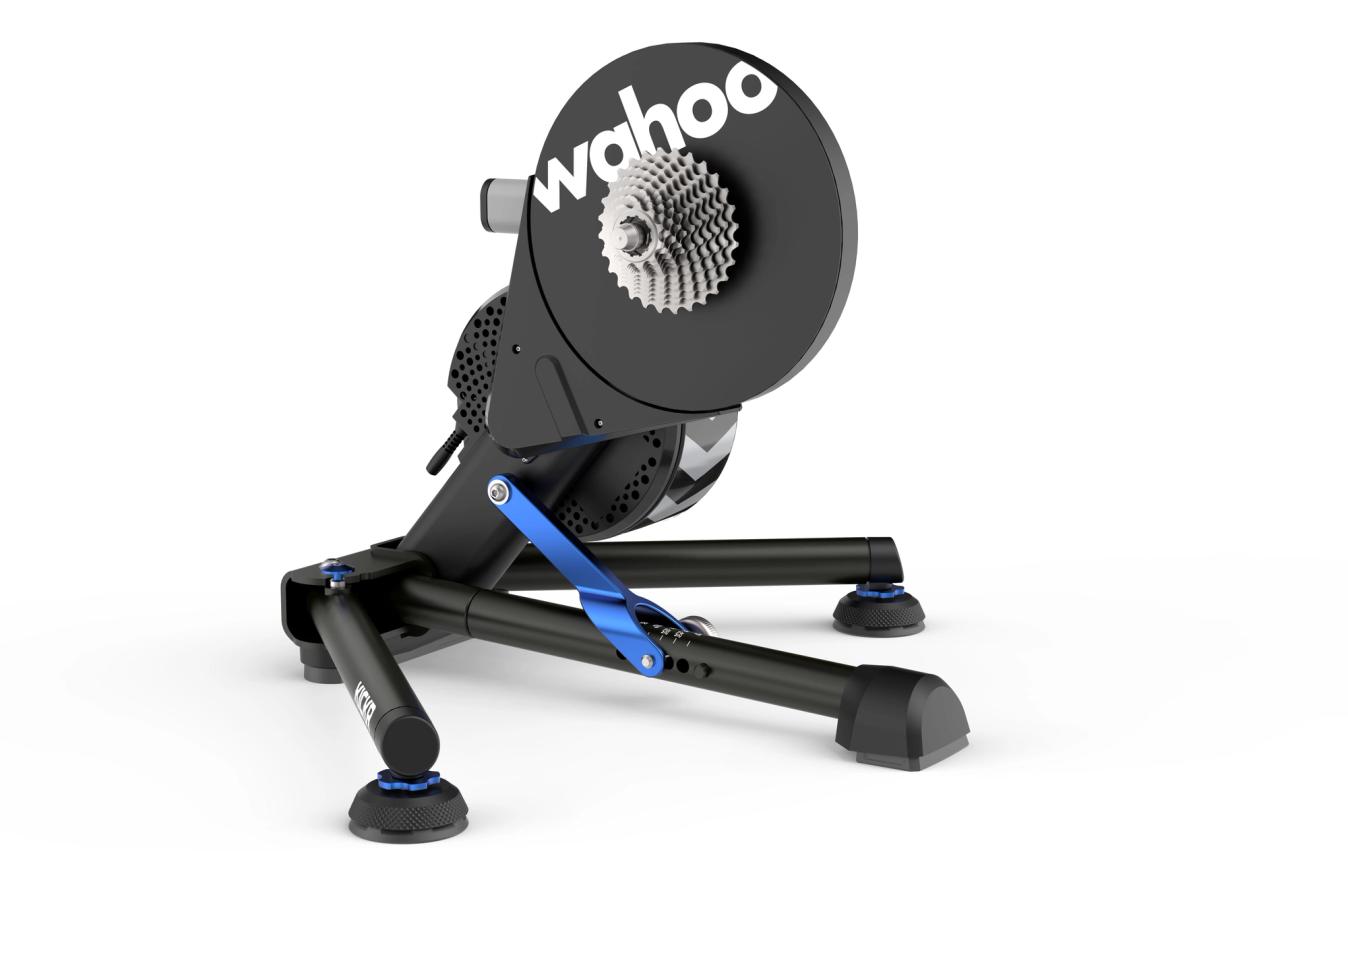 The original trainer from Wahoo has seen many revisions and updates since its launch in 2012